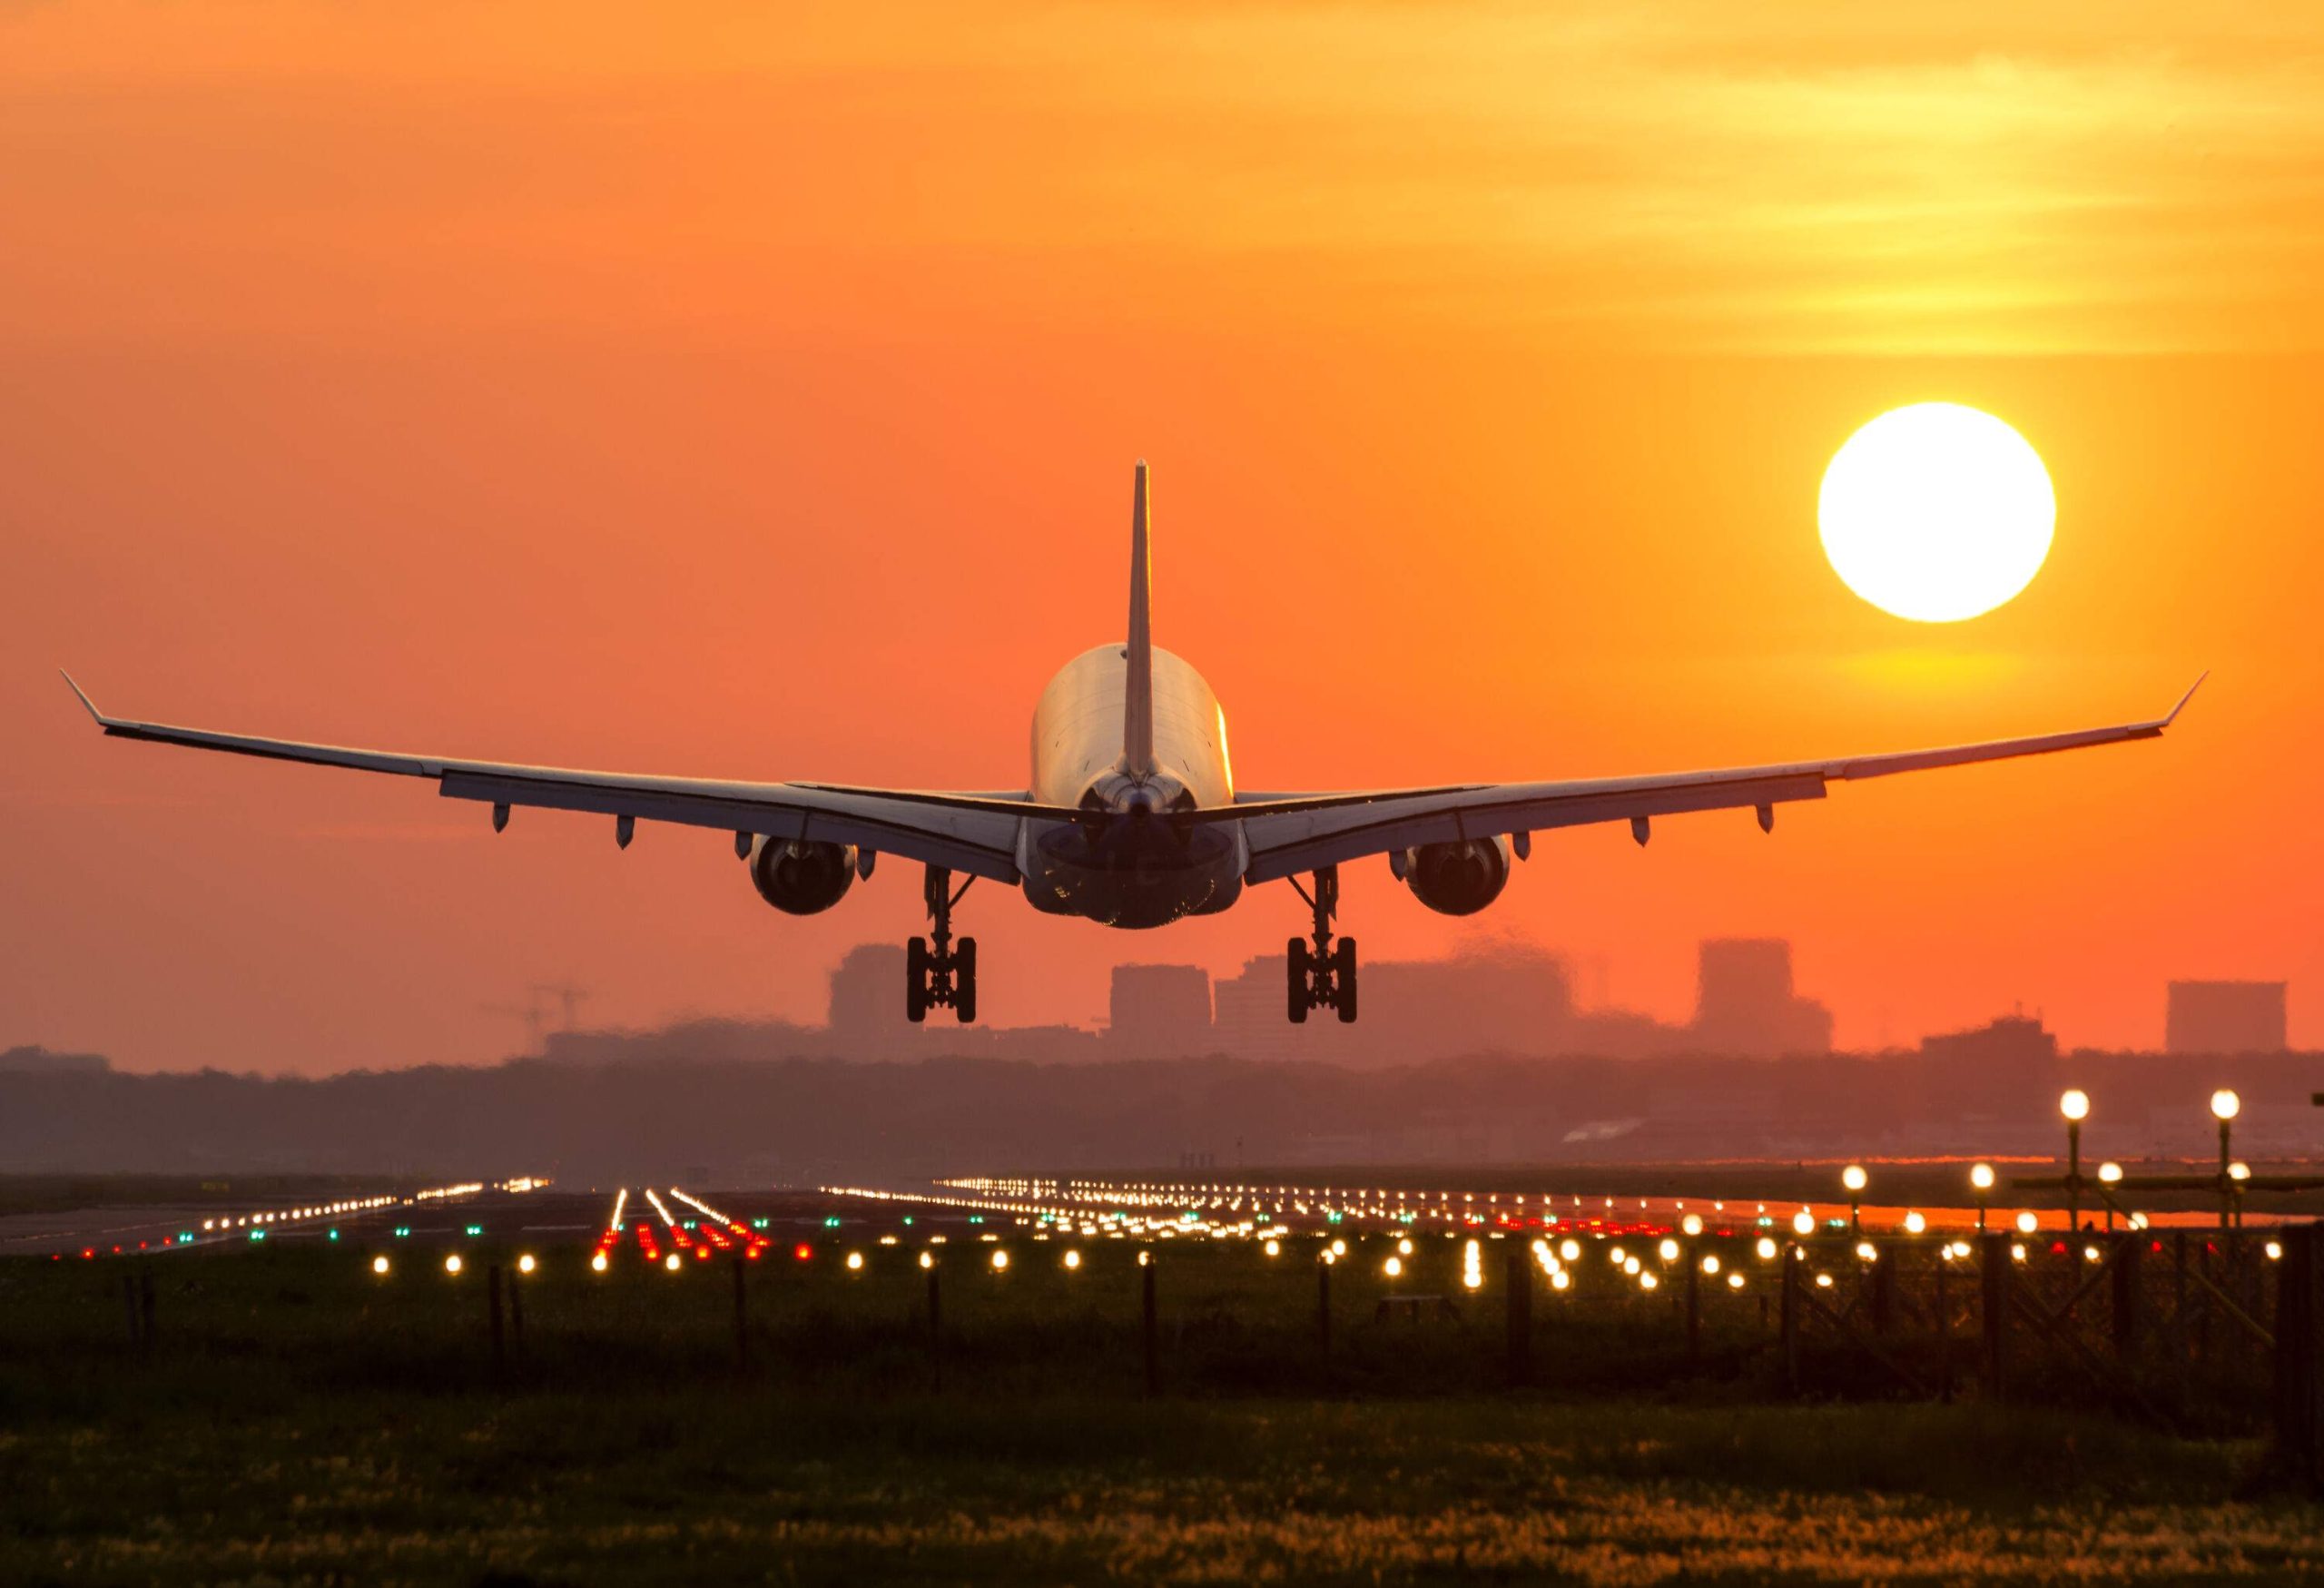 A passenger plane gracefully lands on a beautifully lit runway during a stunning sunrise.